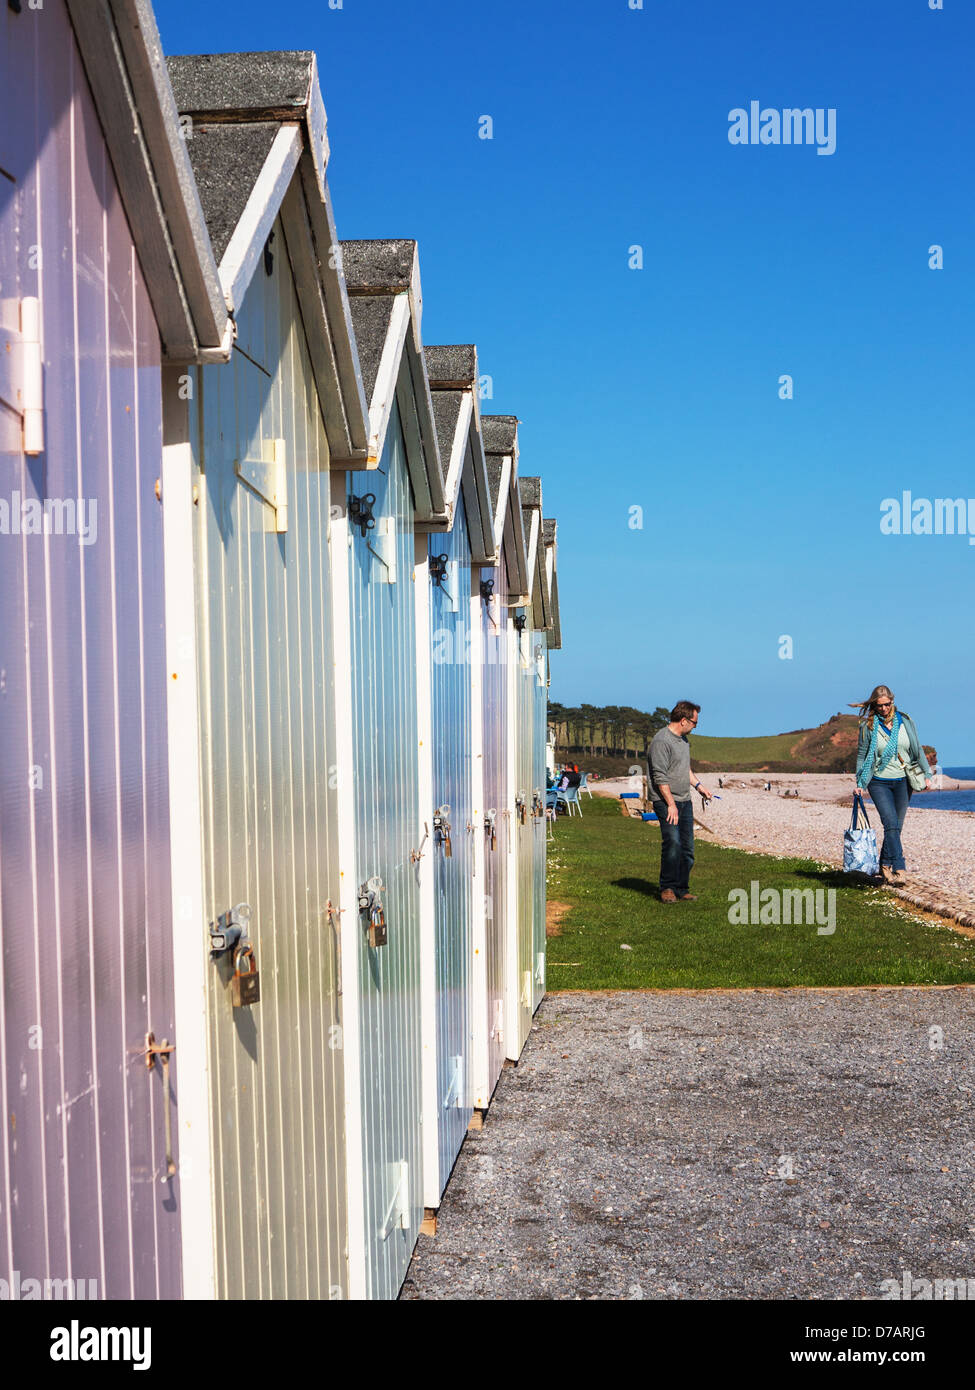 Pastel Coloured Beach Huts And People At Budleigh Salterton Beach Devon England Stock Photo